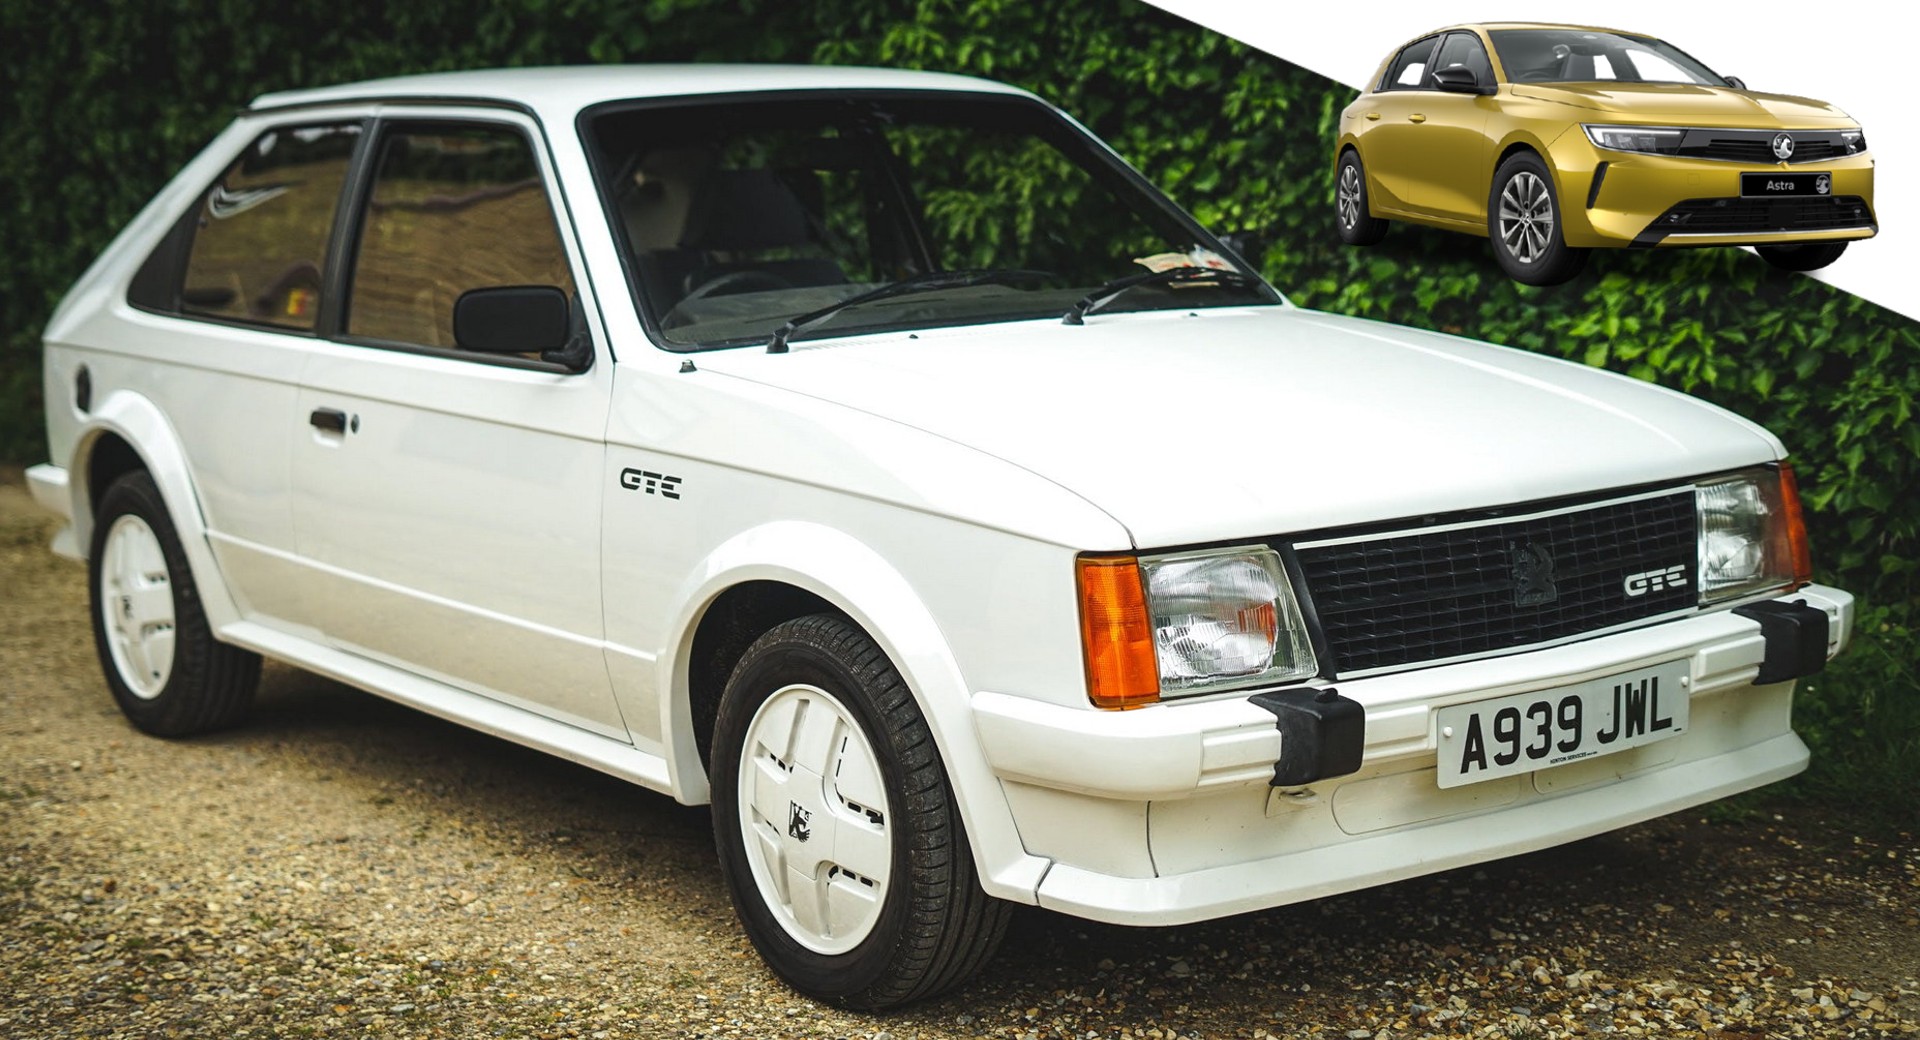 https://www.carscoops.com/wp-content/uploads/2022/06/1983-Vauxhall-Astra-GTE-main-new.jpg